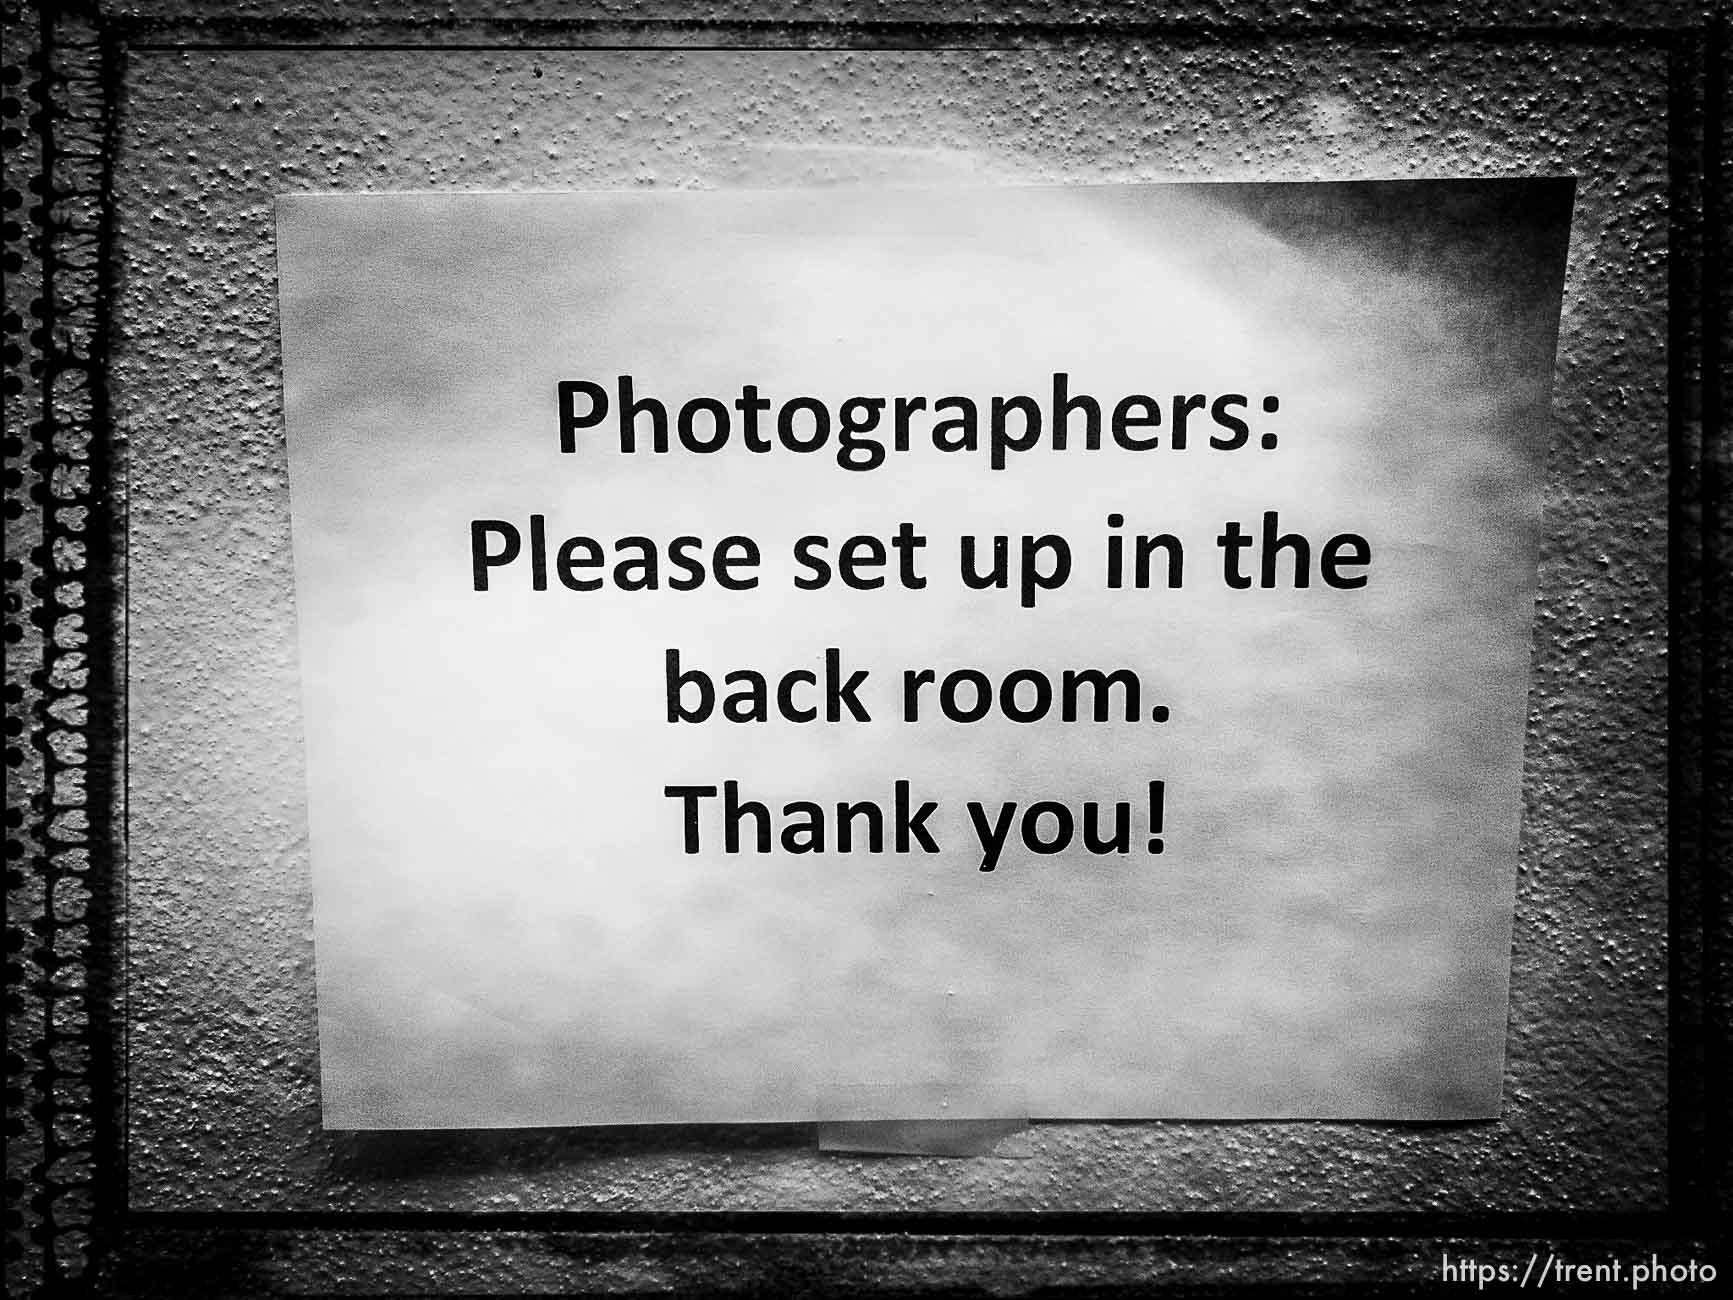 Photographers to the back